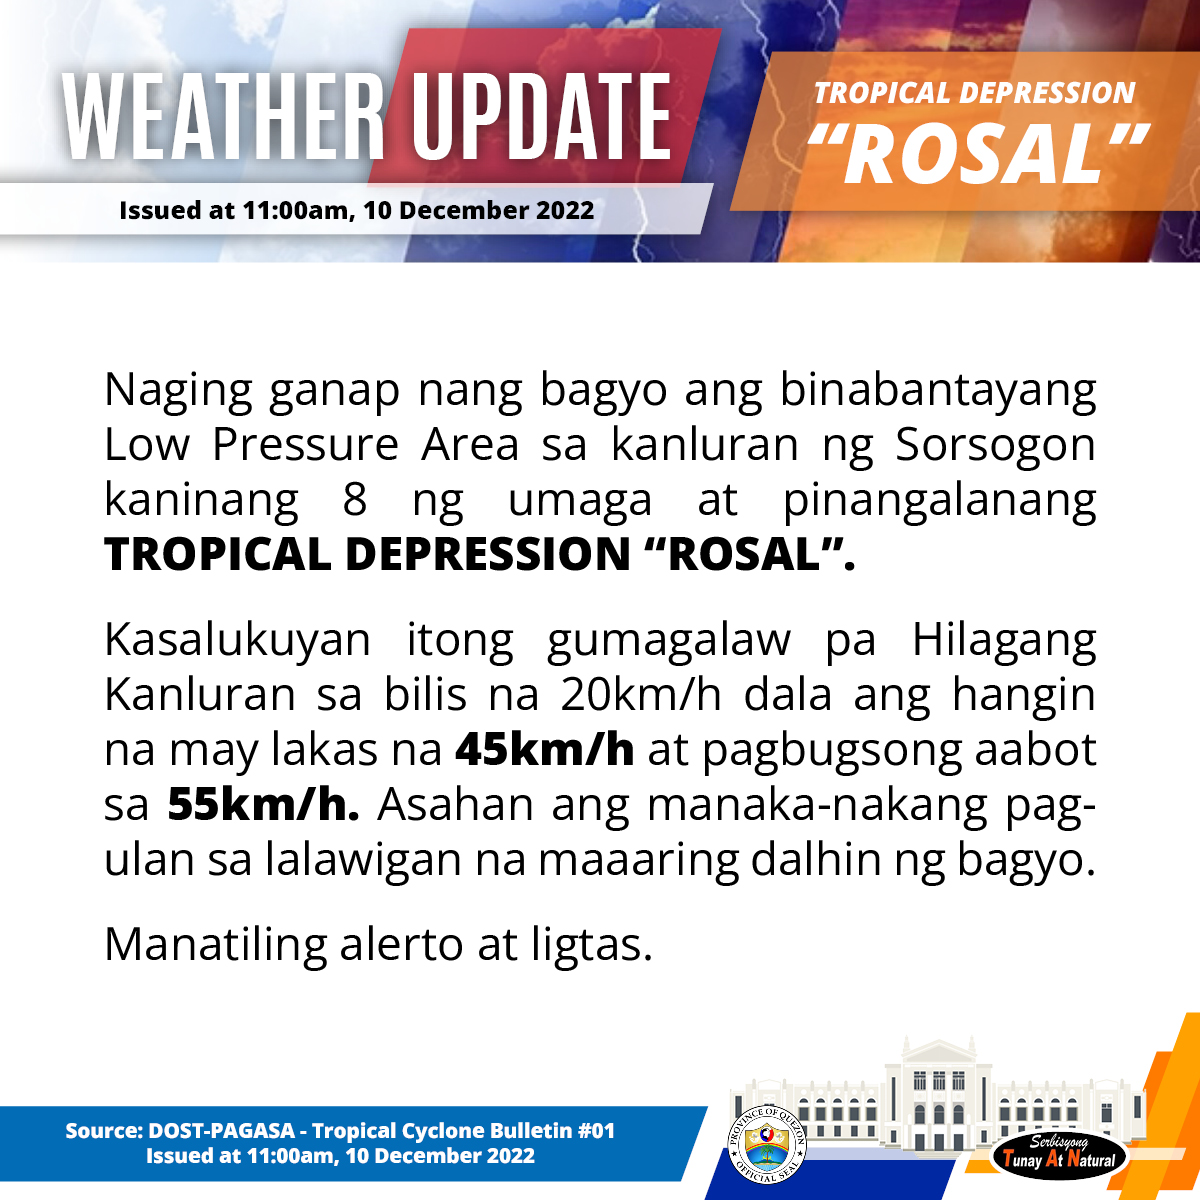 Tropical Cyclone Bulletin NO. 1 | Issued at 11:00 am, December 10, 2022